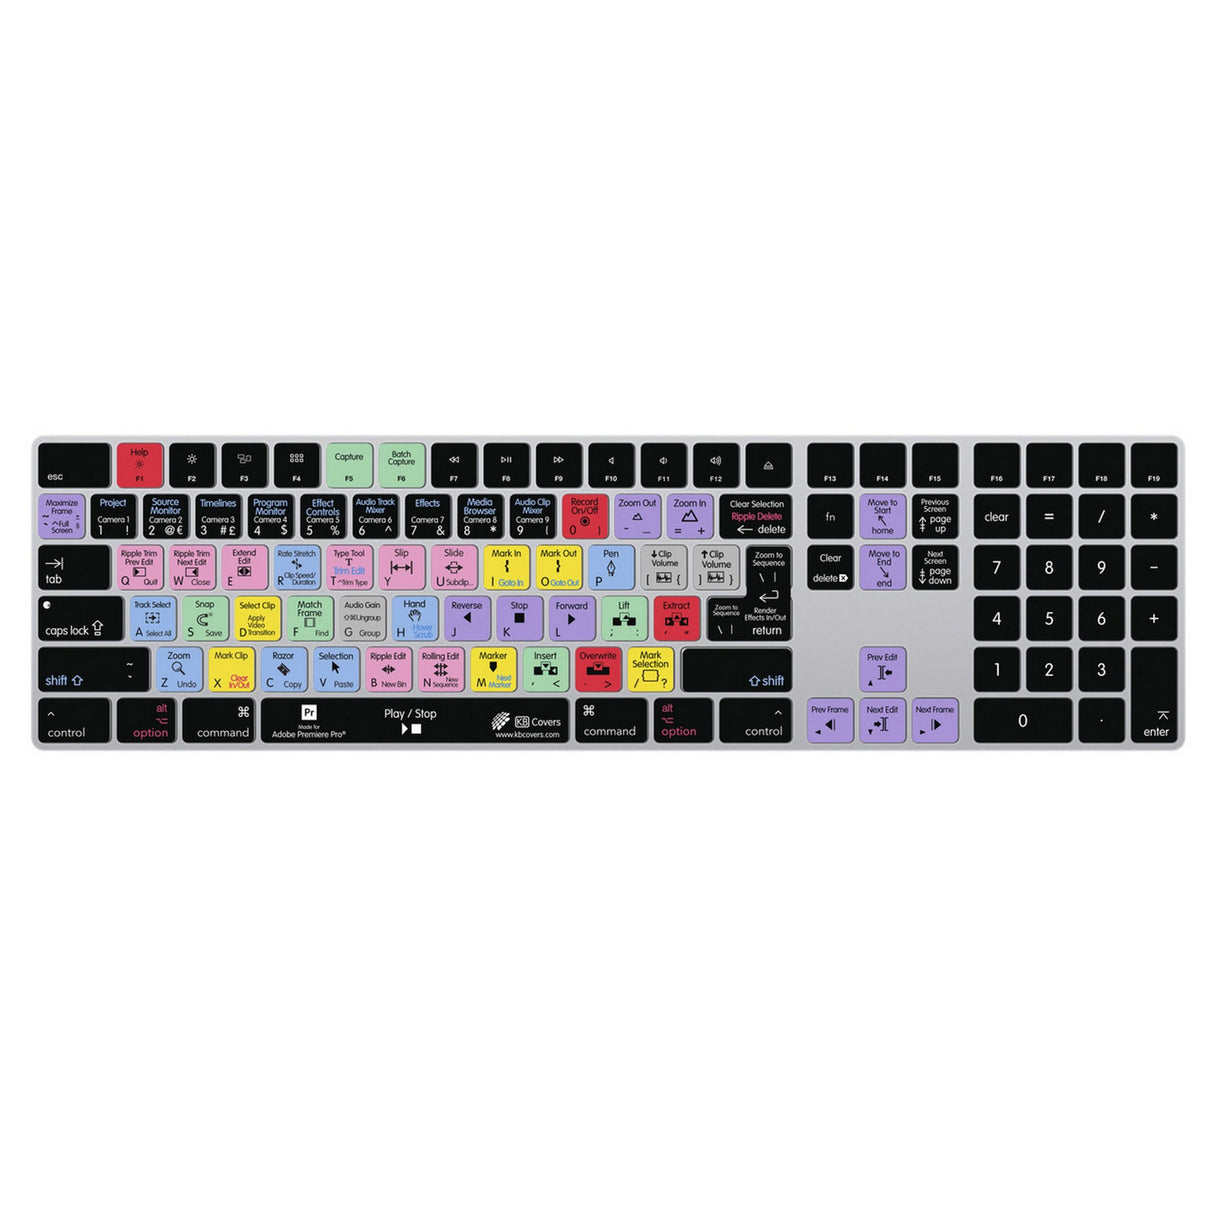 KB Covers PRAD-MKN Premiere Pro Keyboard Cover for Apple Magic Keyboard with Numpad (Used)